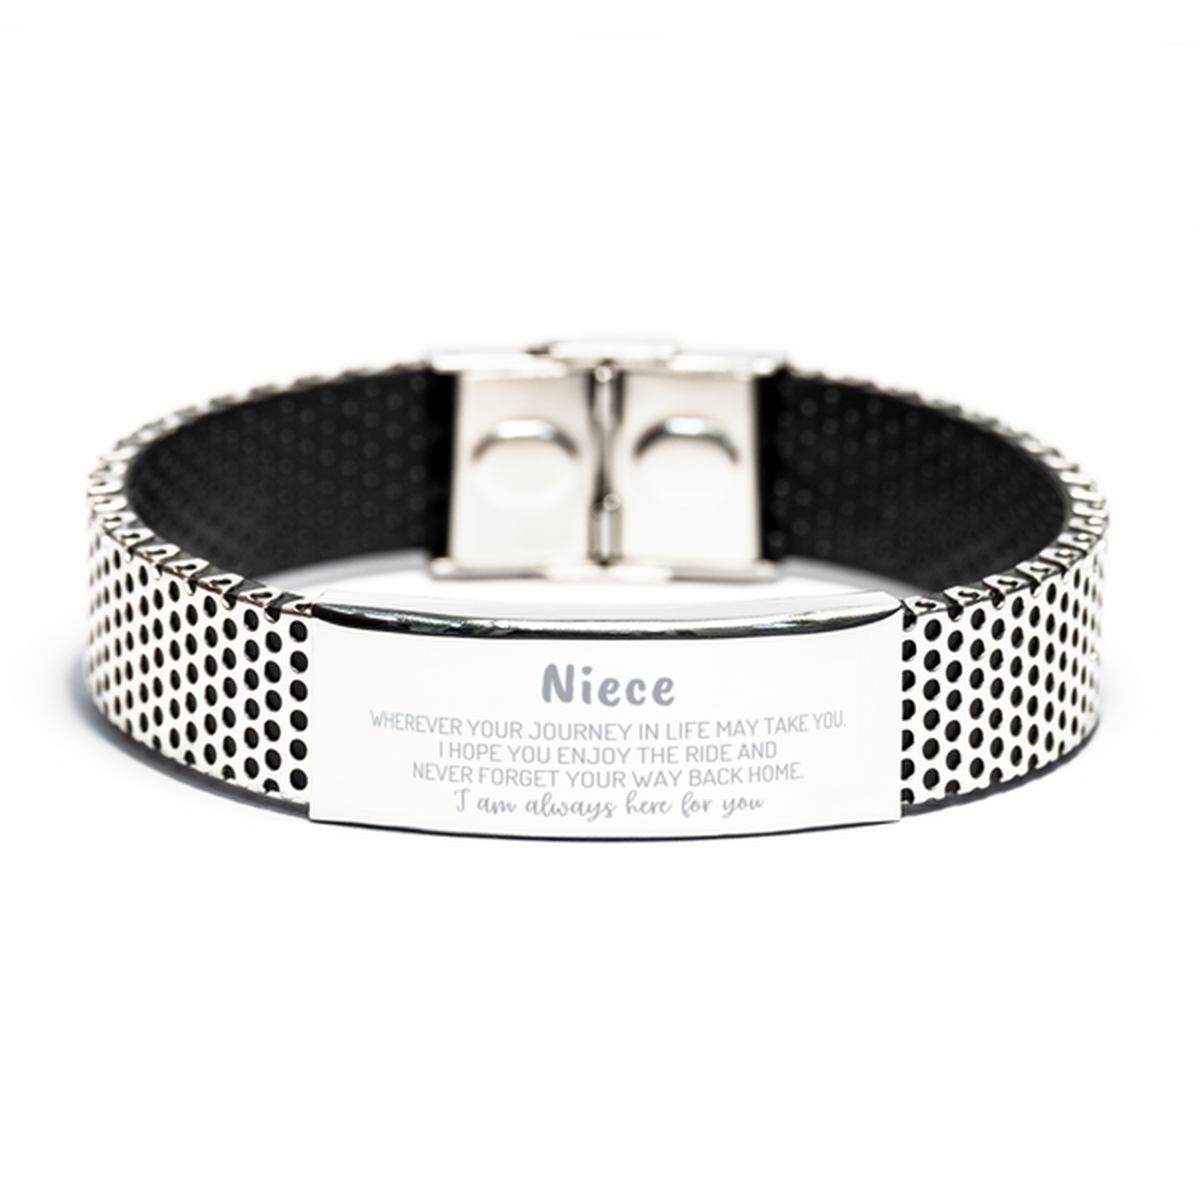 Niece wherever your journey in life may take you, I am always here for you Niece Stainless Steel Bracelet, Awesome Christmas Gifts For Niece, Niece Birthday Gifts for Men Women Family Loved One